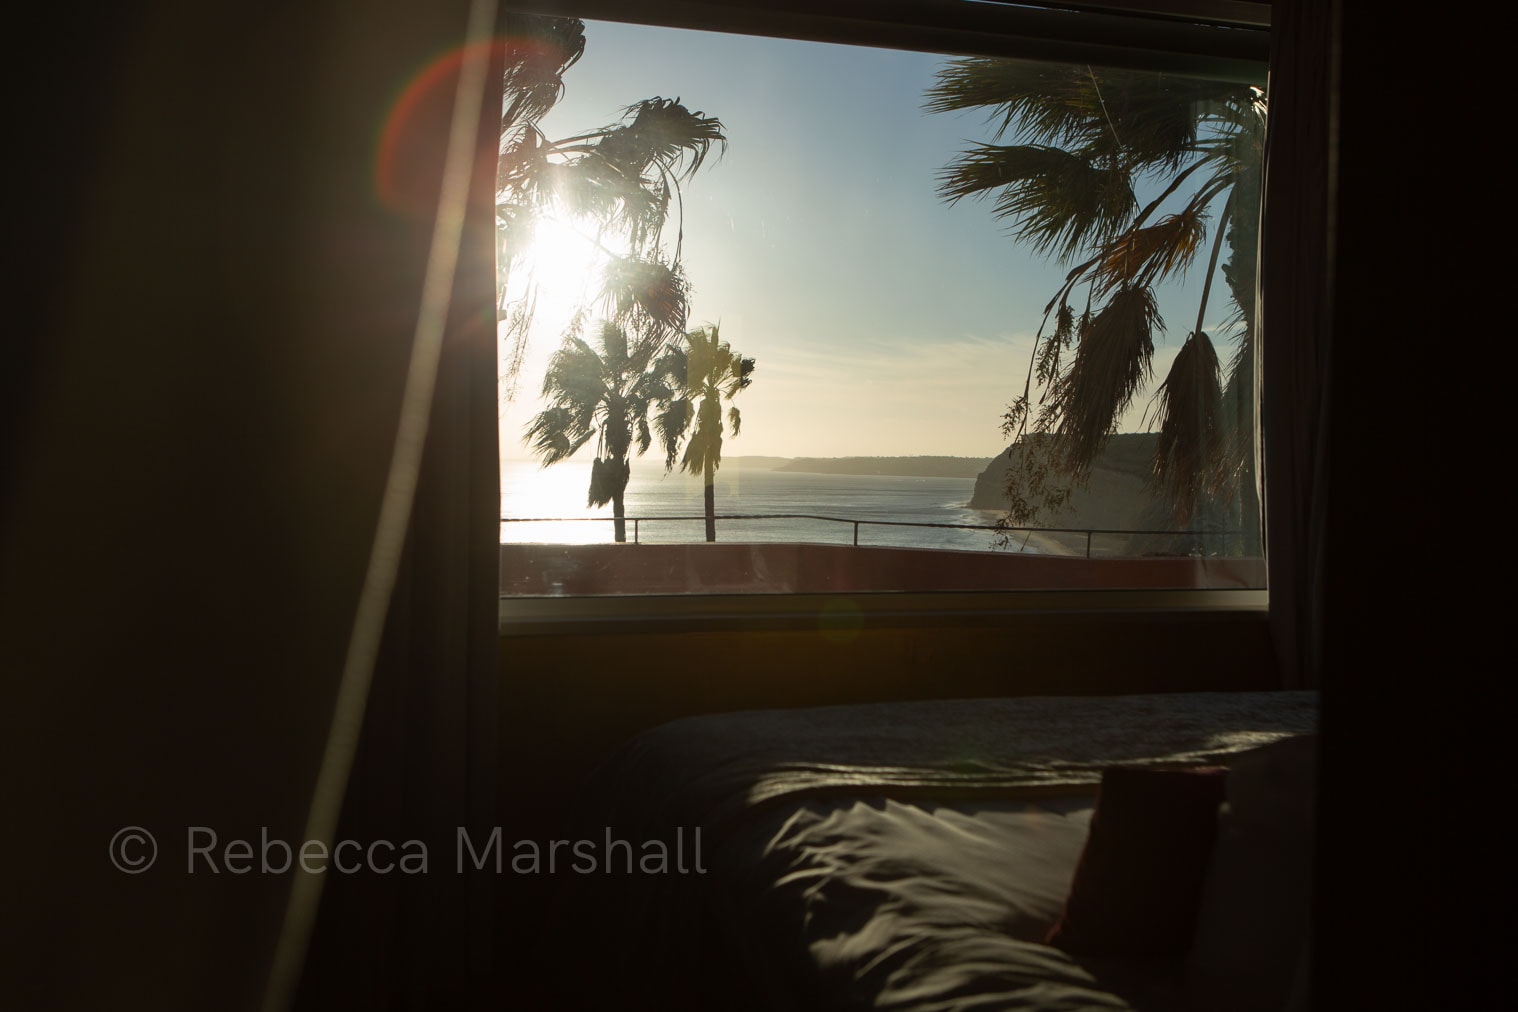 Photograph through a bedroom window of palm trees and a coastline